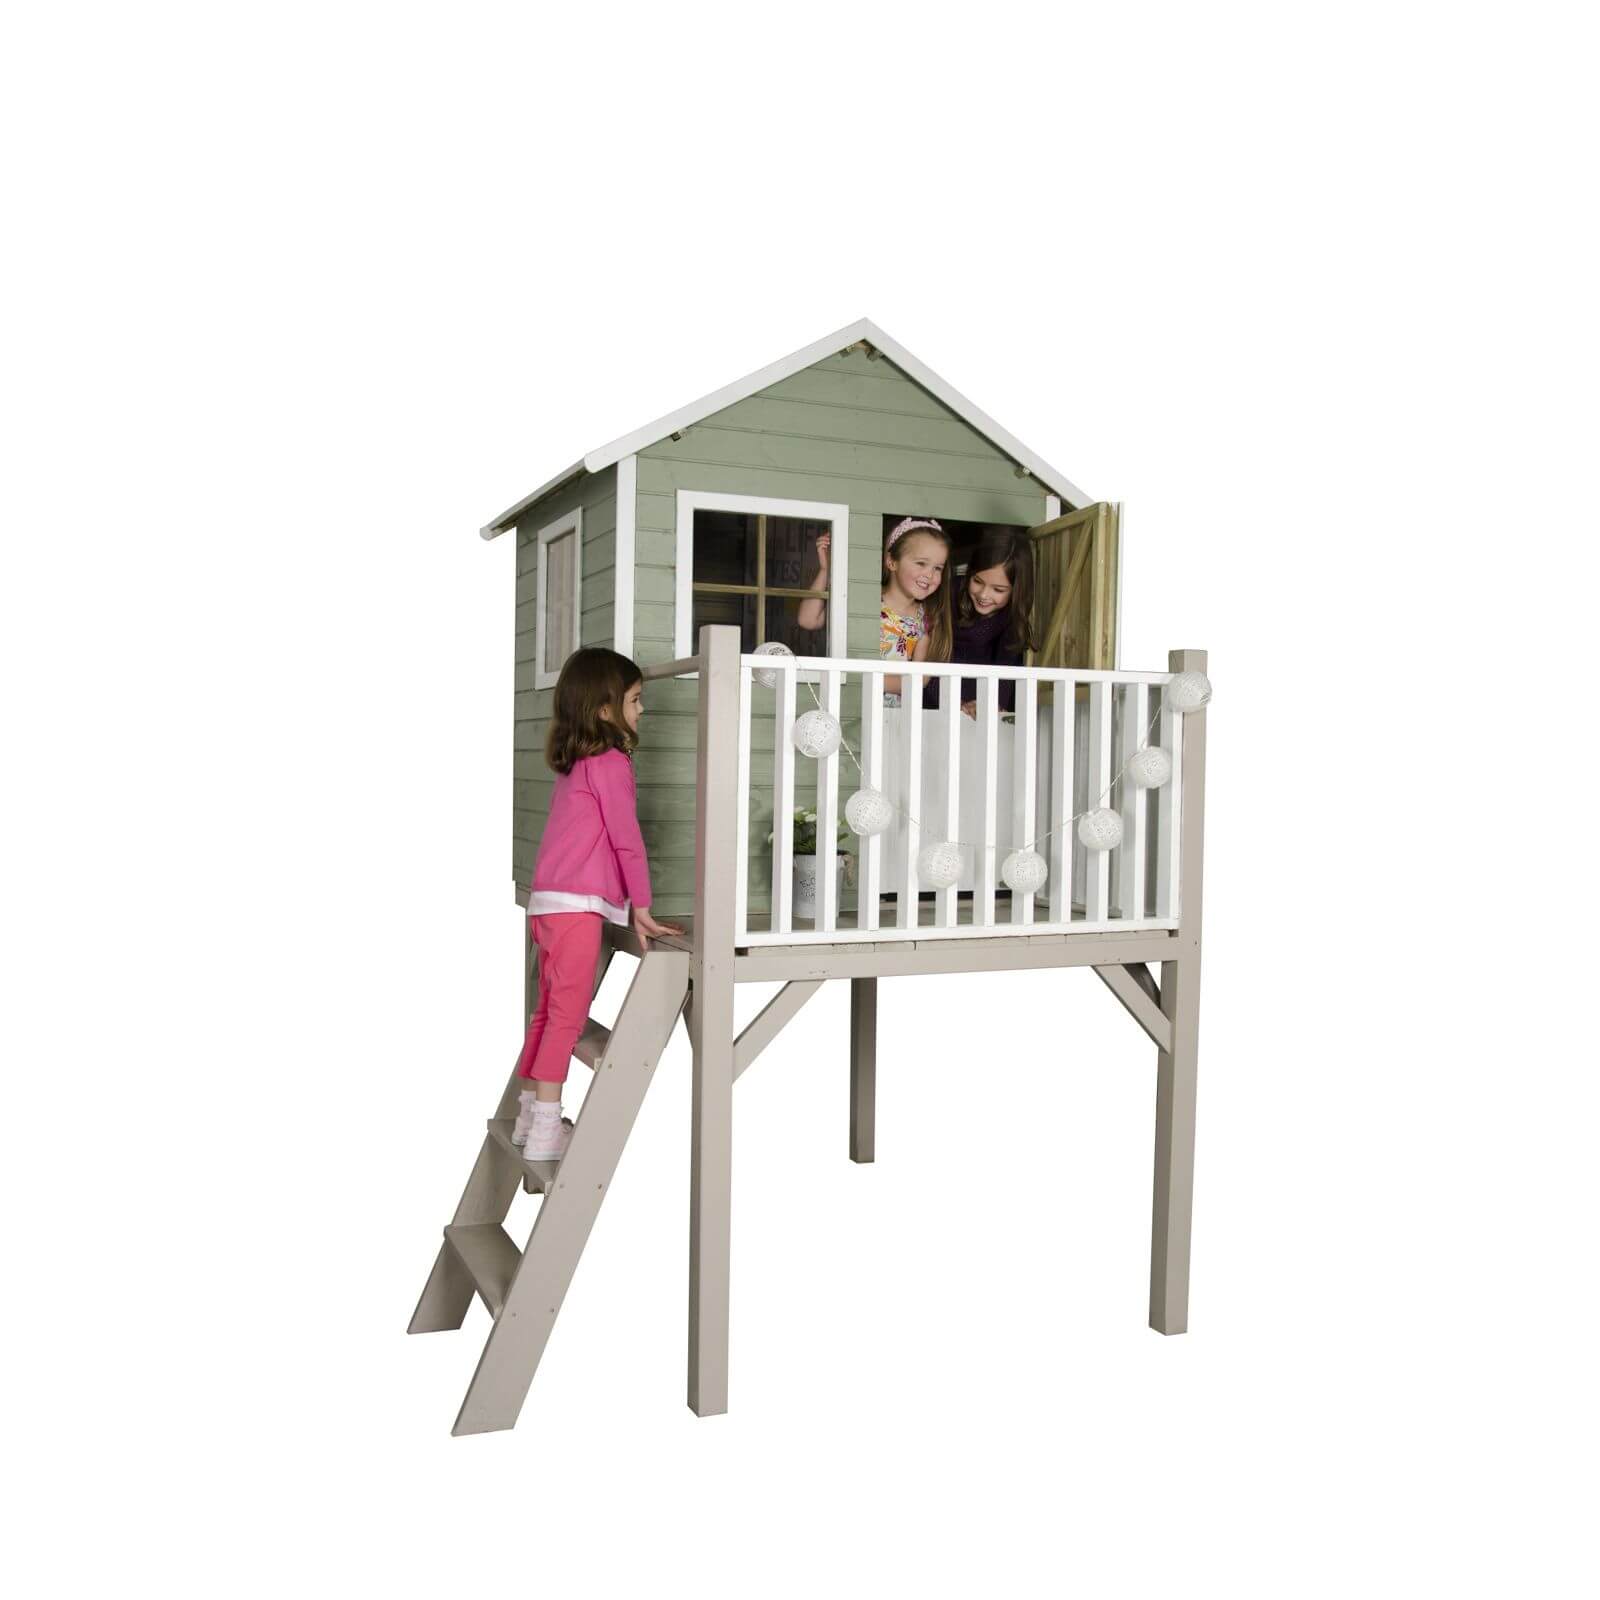 Forest 4x4ft Garden Sage Wooden Pressure Treated Tower Playhouse